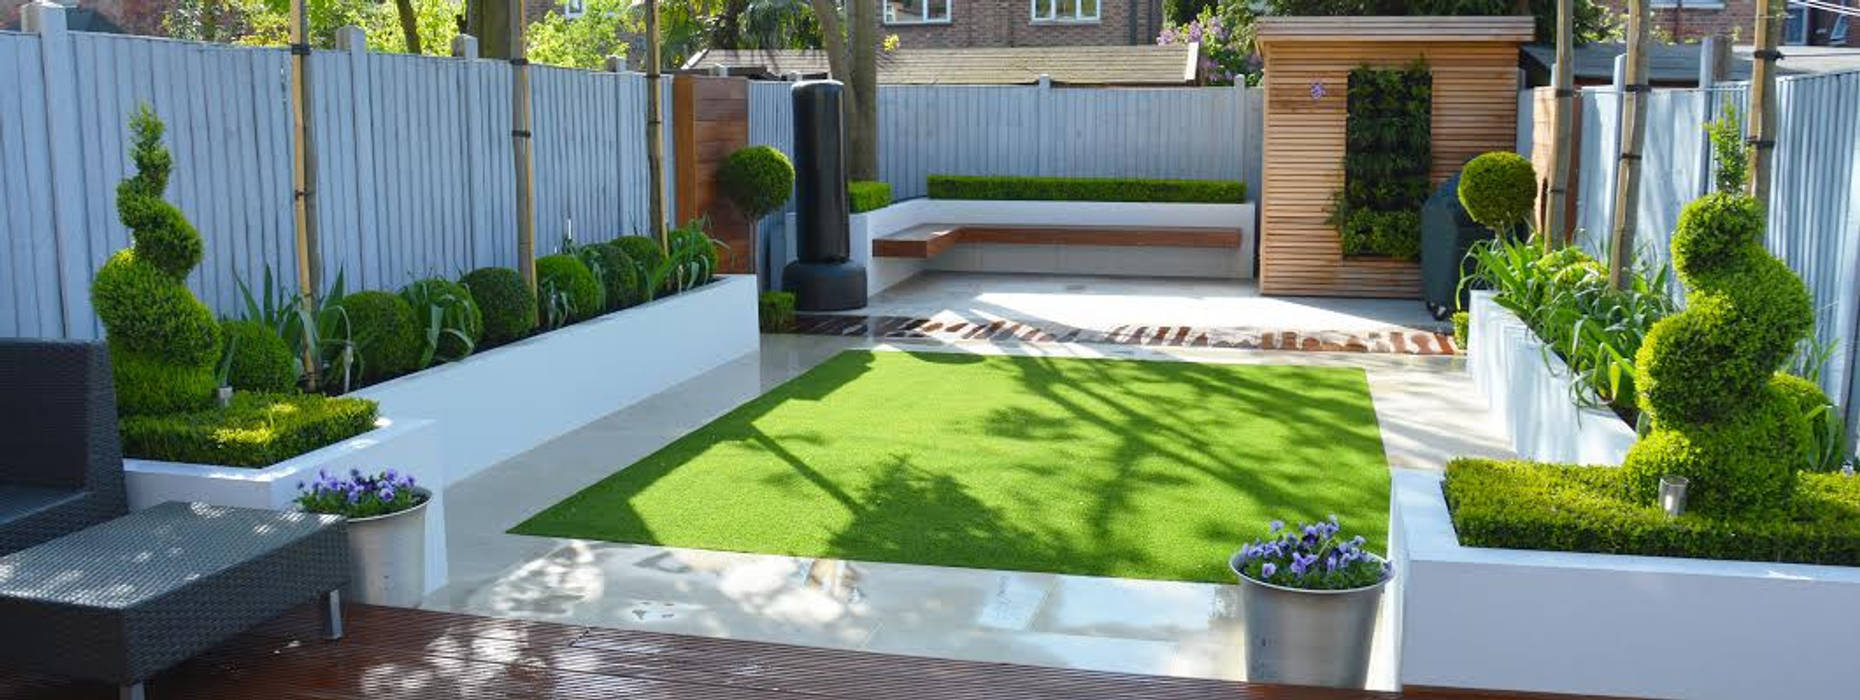 Minimalist Garden: Amazing relaxing space that you will fall in love with, Landscaper in London Landscaper in London モダンな庭